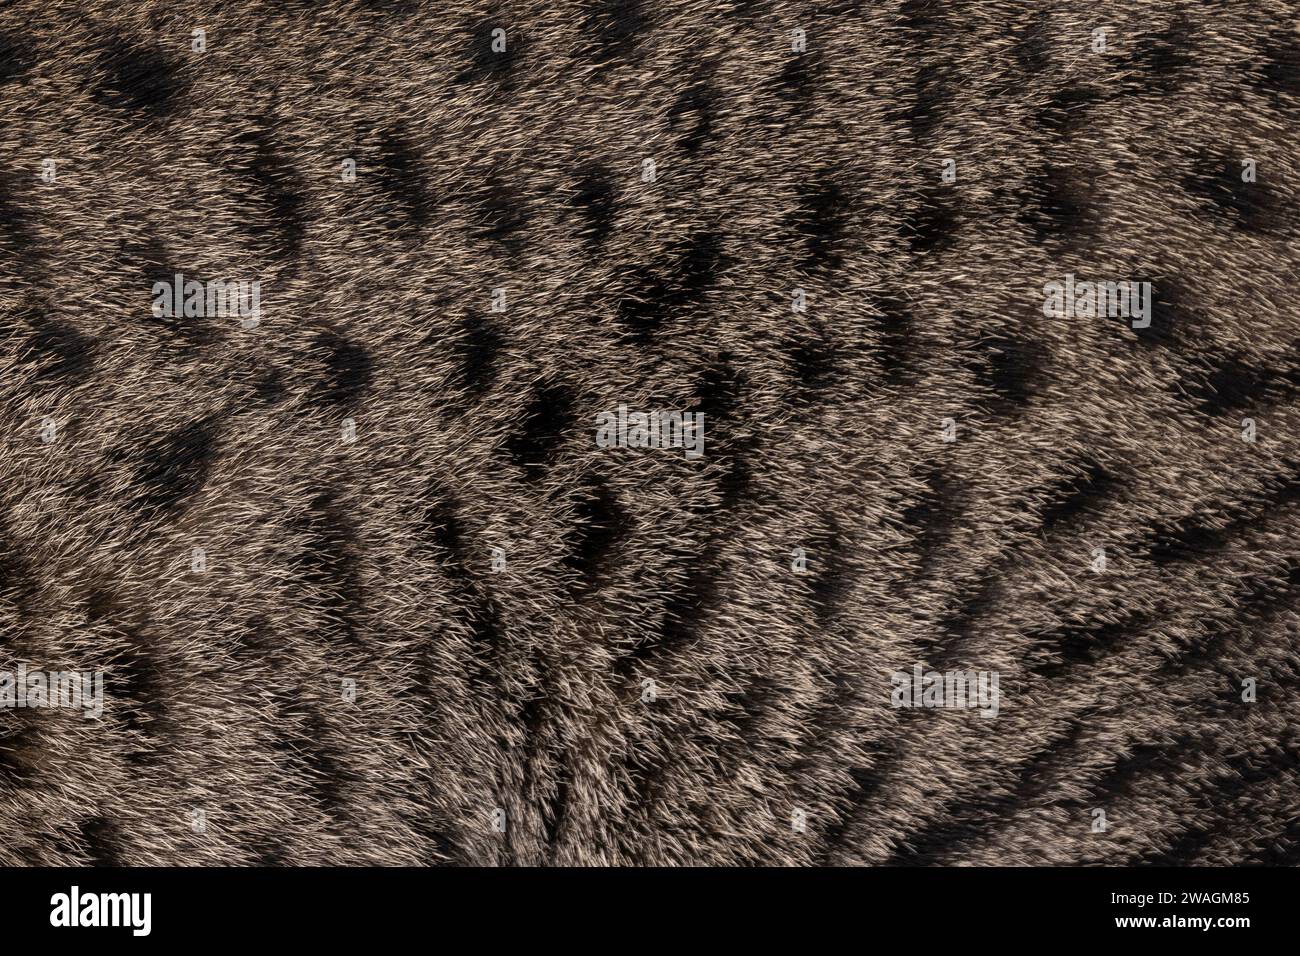 Full frame macro detailed  image of brown with black spotted domestic Savannah cat fur. Stock Photo